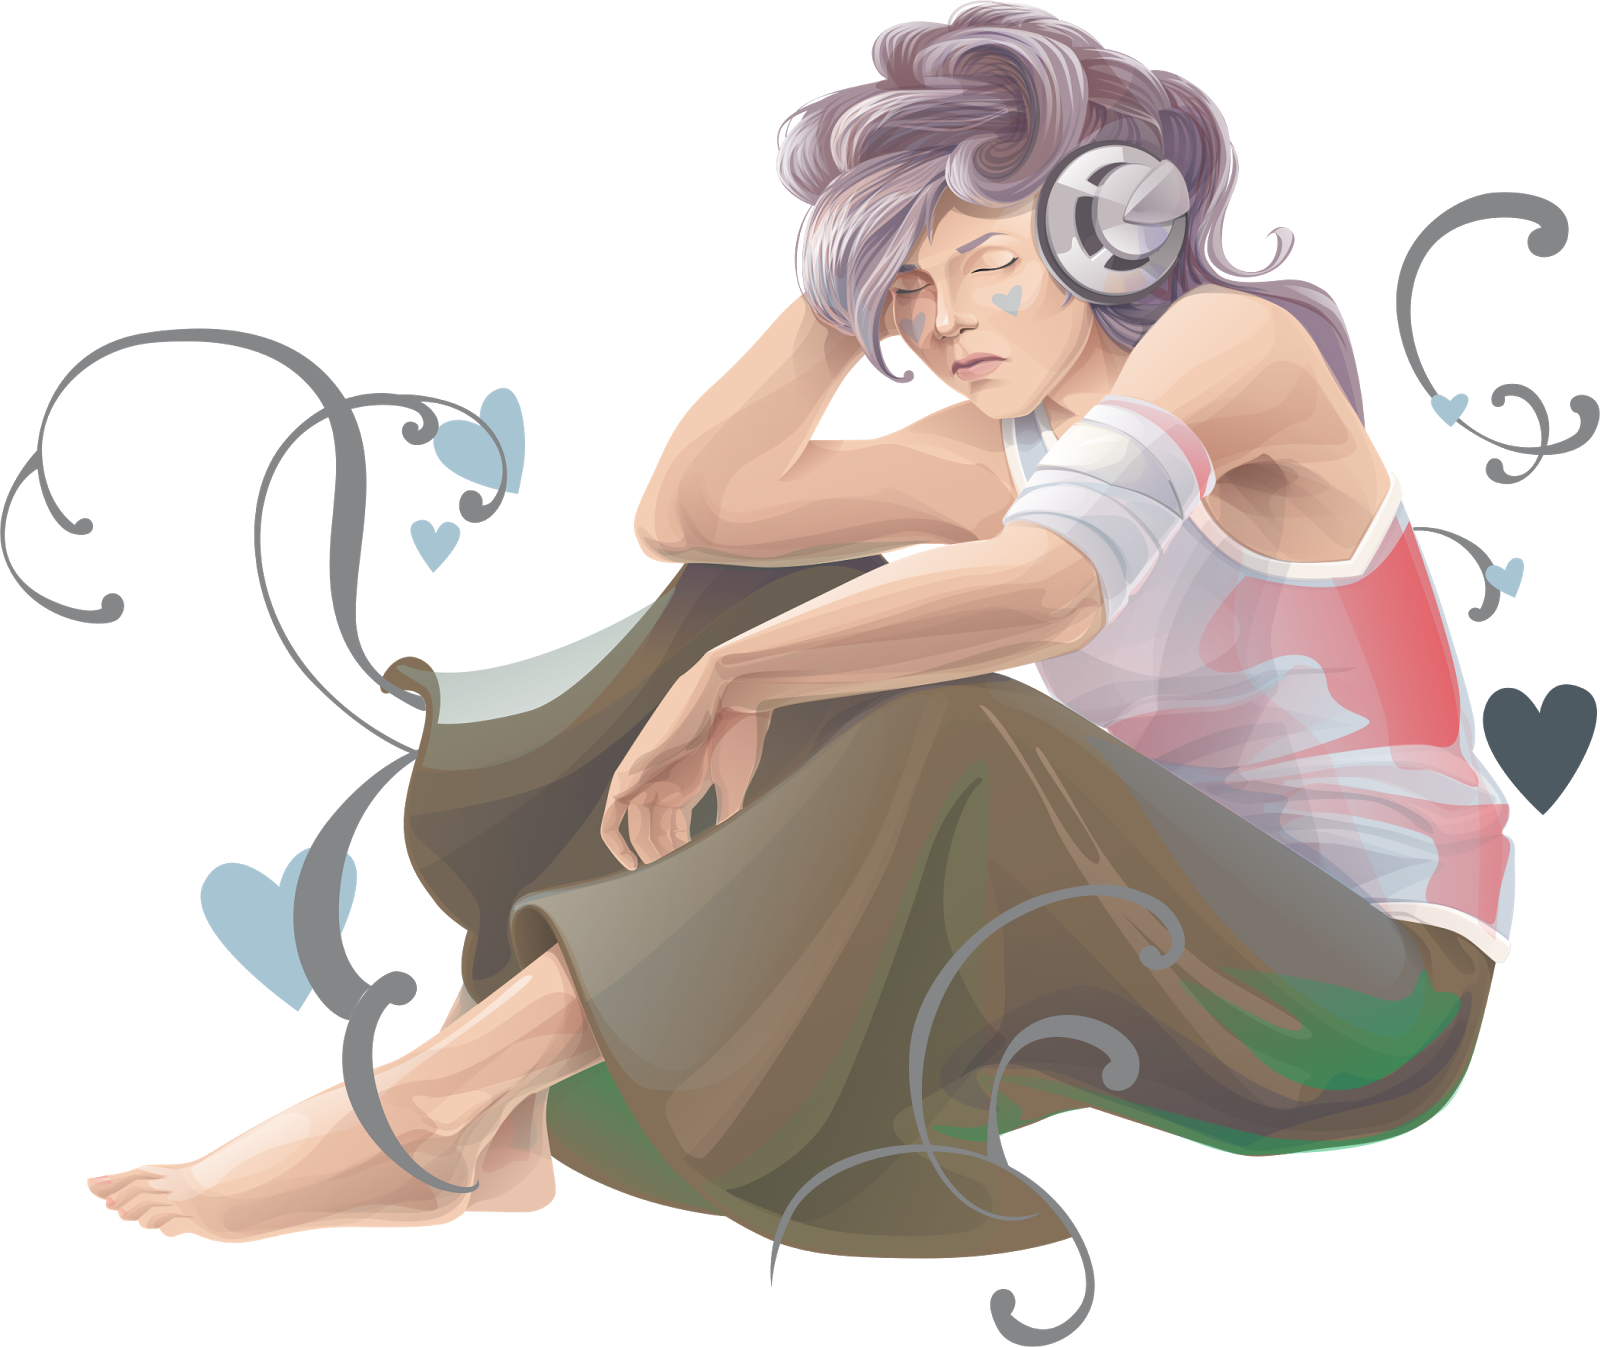 Girl Vector Music Listening Download HQ PNG Image